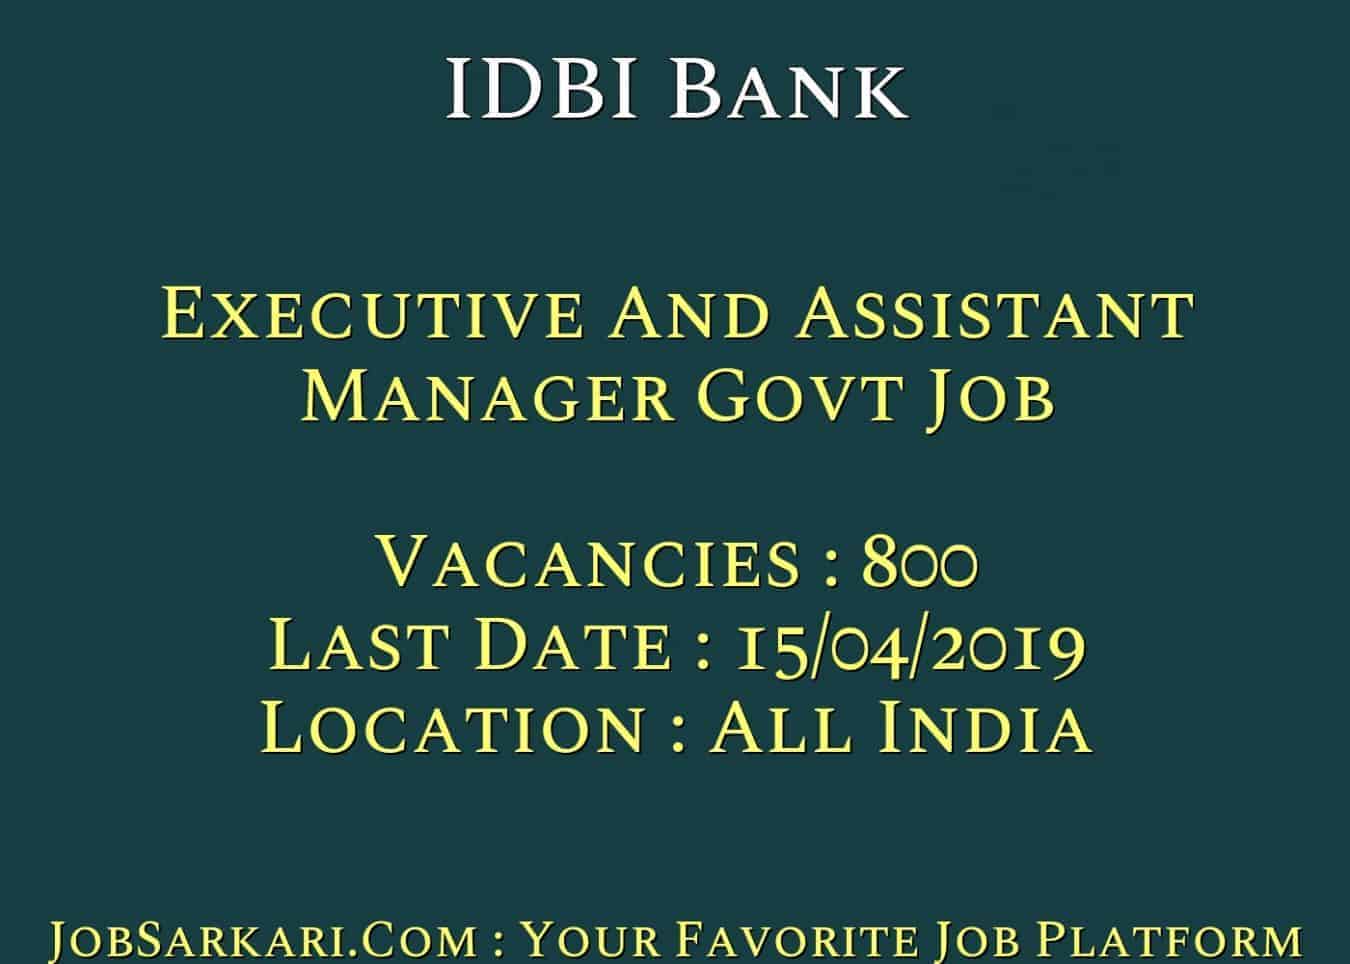 IDBI Bank Recruitment 2019 For Executive And Assistant Manager Govt Job